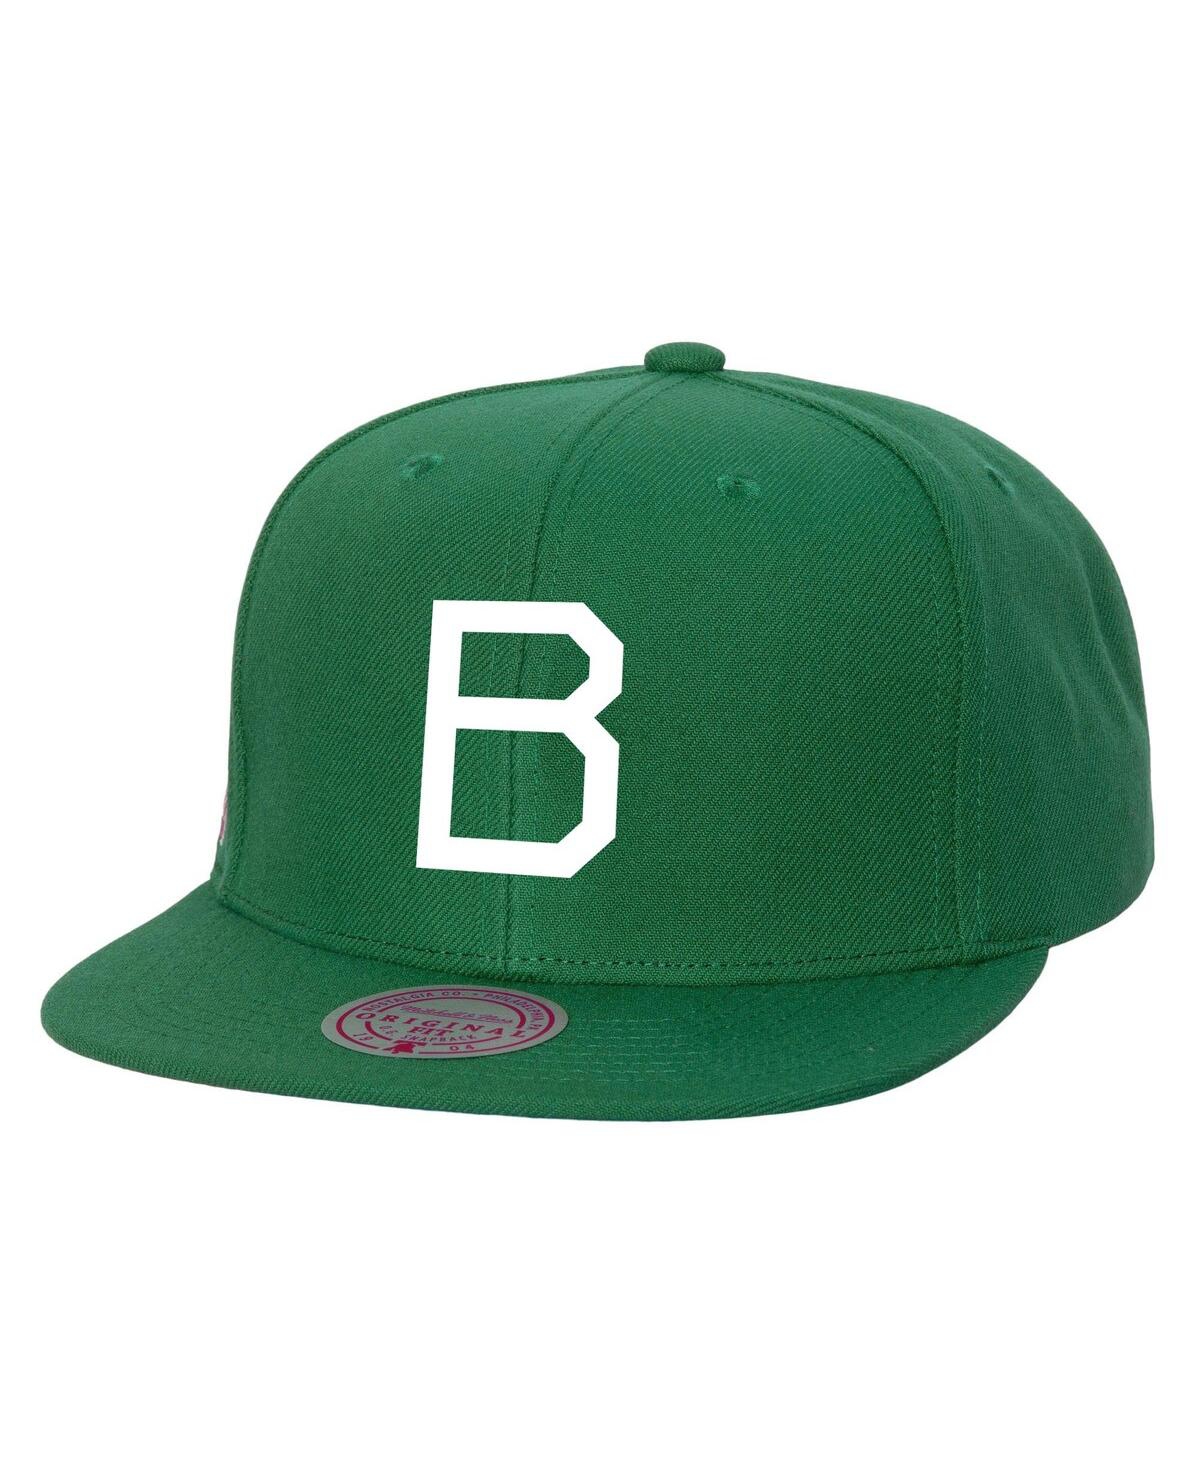 Mitchell & Ness Men's  Green Brooklyn Dodgers Cooperstown Collection Evergreen Snapback Hat